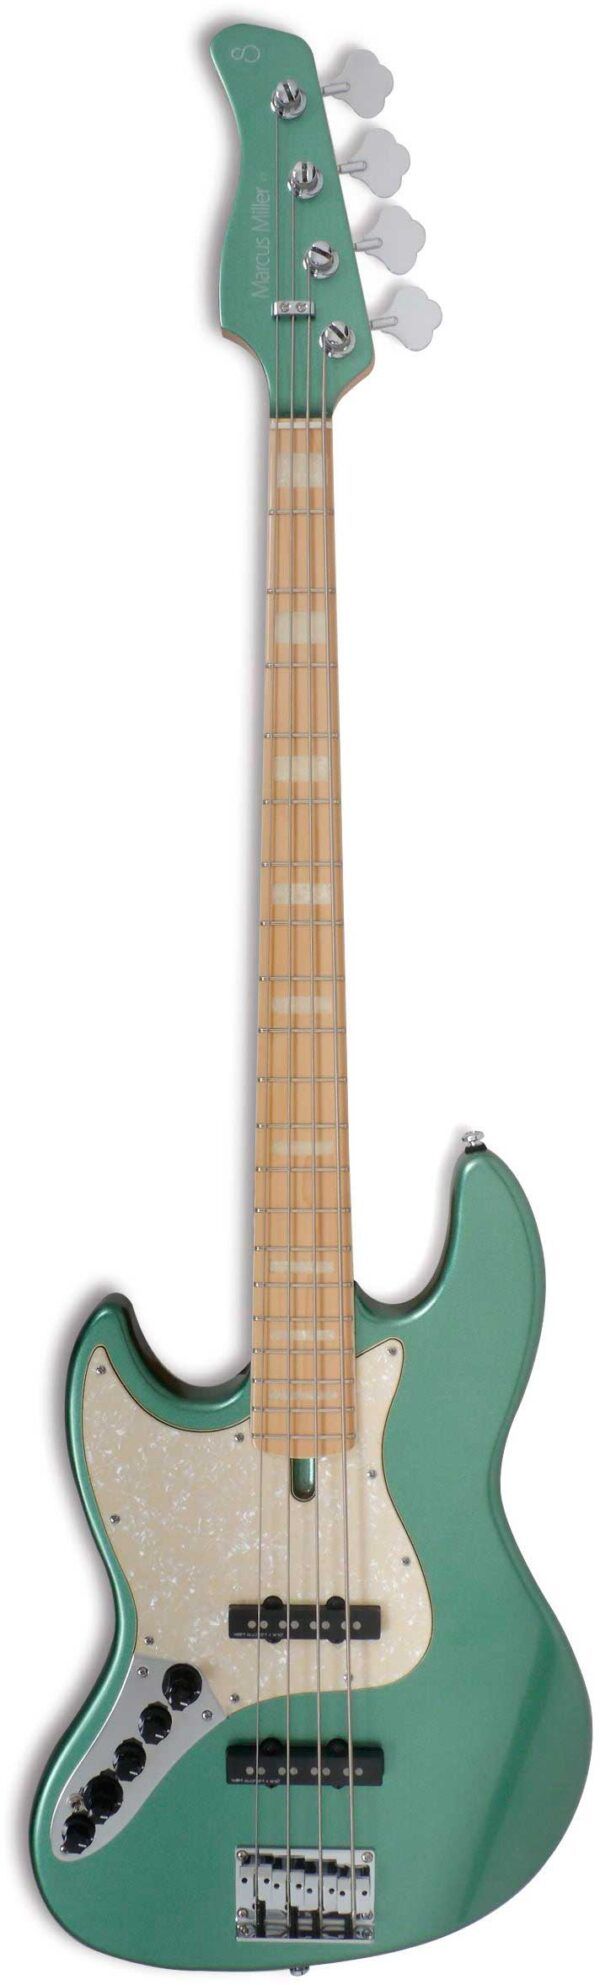 BAJO PARA ZURDOS Marcus Miller Bass. 2nd Gen. Lefthand. Body Material : Swamp Ash. Body Shape : New Marcus Miller Jazz Type. Neck Material : 1 Piece Hard Maple(Satin Finish). Neck Shape : C-Shape. Scale : 34”. Fingerboard (Rolled Edges) : Hard Maple. Fingerboard Radius : 9.5?. Frets : 2.4 medium. String Nut : 4 String – Natural Bone 38mm width. Binding : 1 ply Ivory. Inlay : WH Pearloid Block. Neck Joint : 4 Bolt Steel Square Plate. Pickups : Marcus Super-J Revolution Set. Electronics : Marcus Heritage-3 with Middle Frequency Control. Controls : Volume / Tone(Dual Pot)  Pickup Blender  Treble  Middle / Middle Frequency (Dual Pot)  Bass